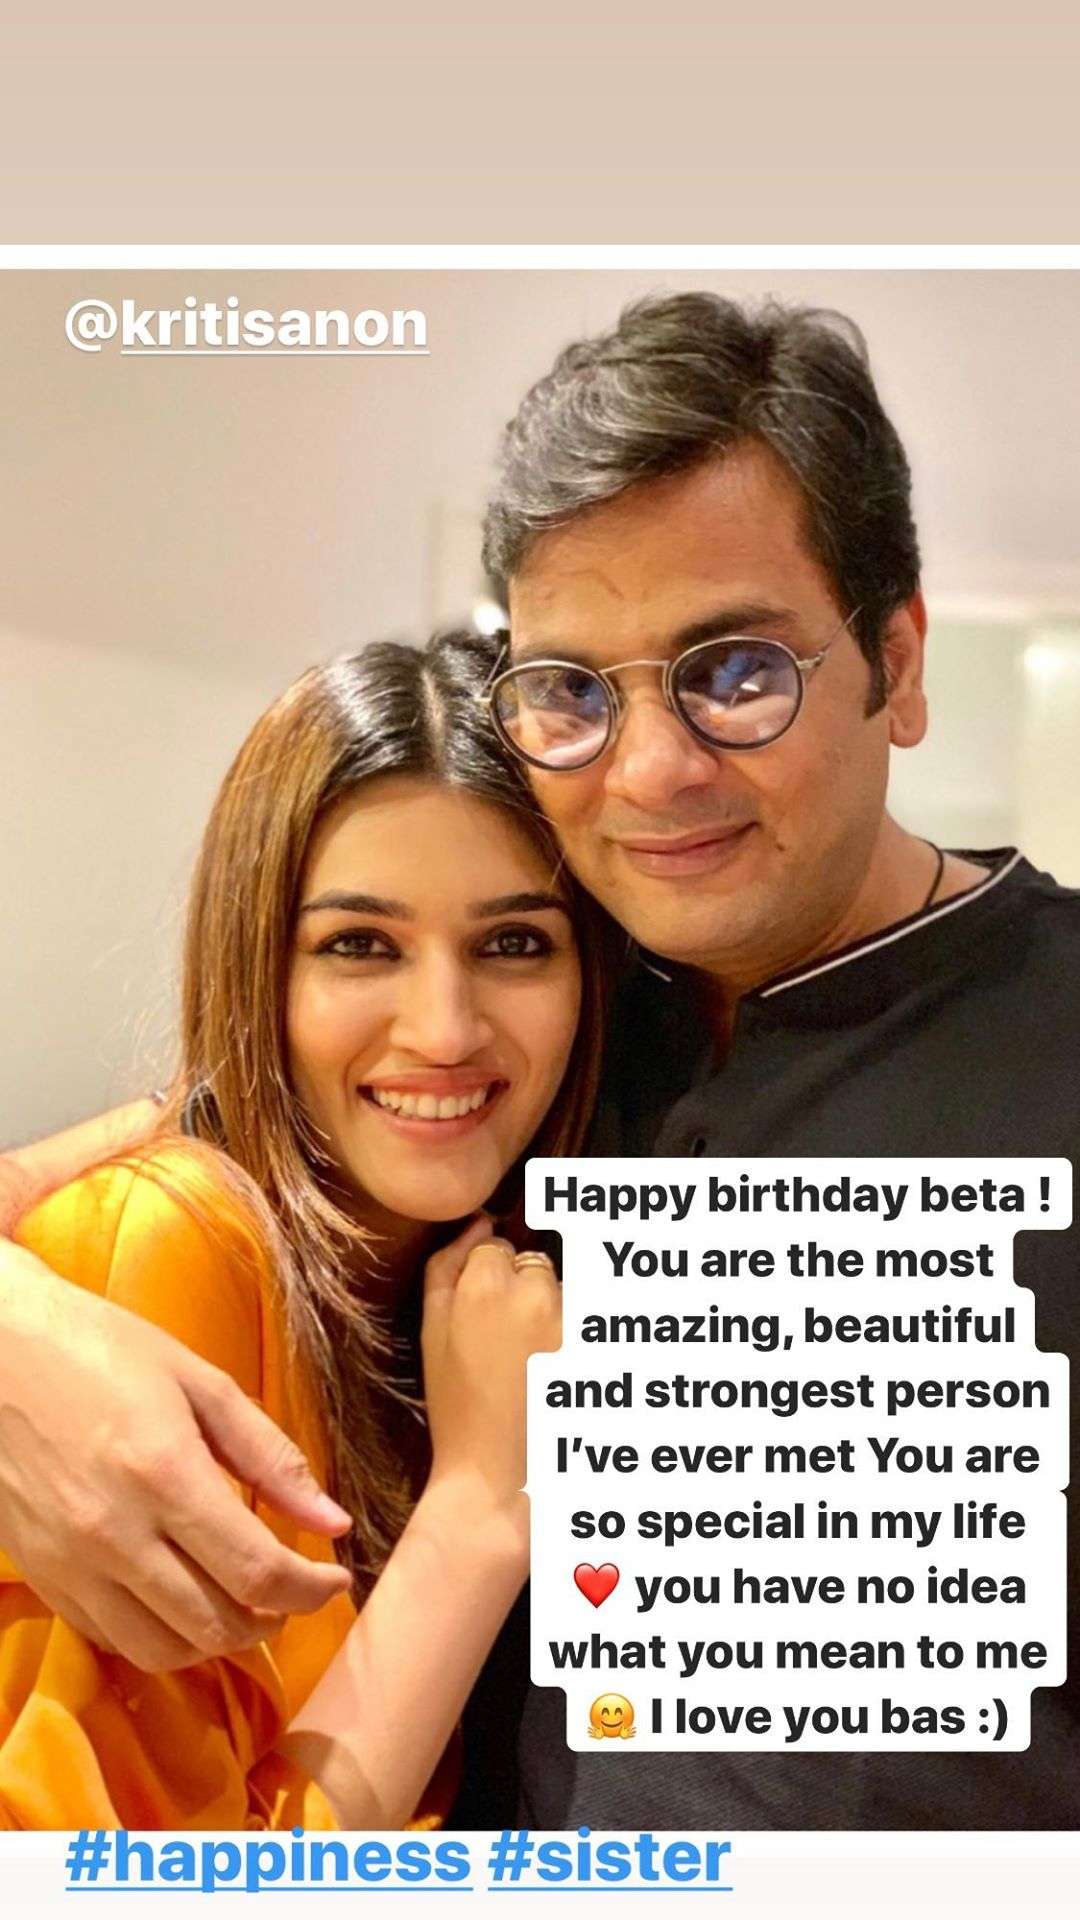 Happy Birthday Kriti Sanon Varun Dhawan Sanjana Sanghi And Other B Town Celebs Pour In Sweet Wishes For The Actress Hindi Movie News Times Of India